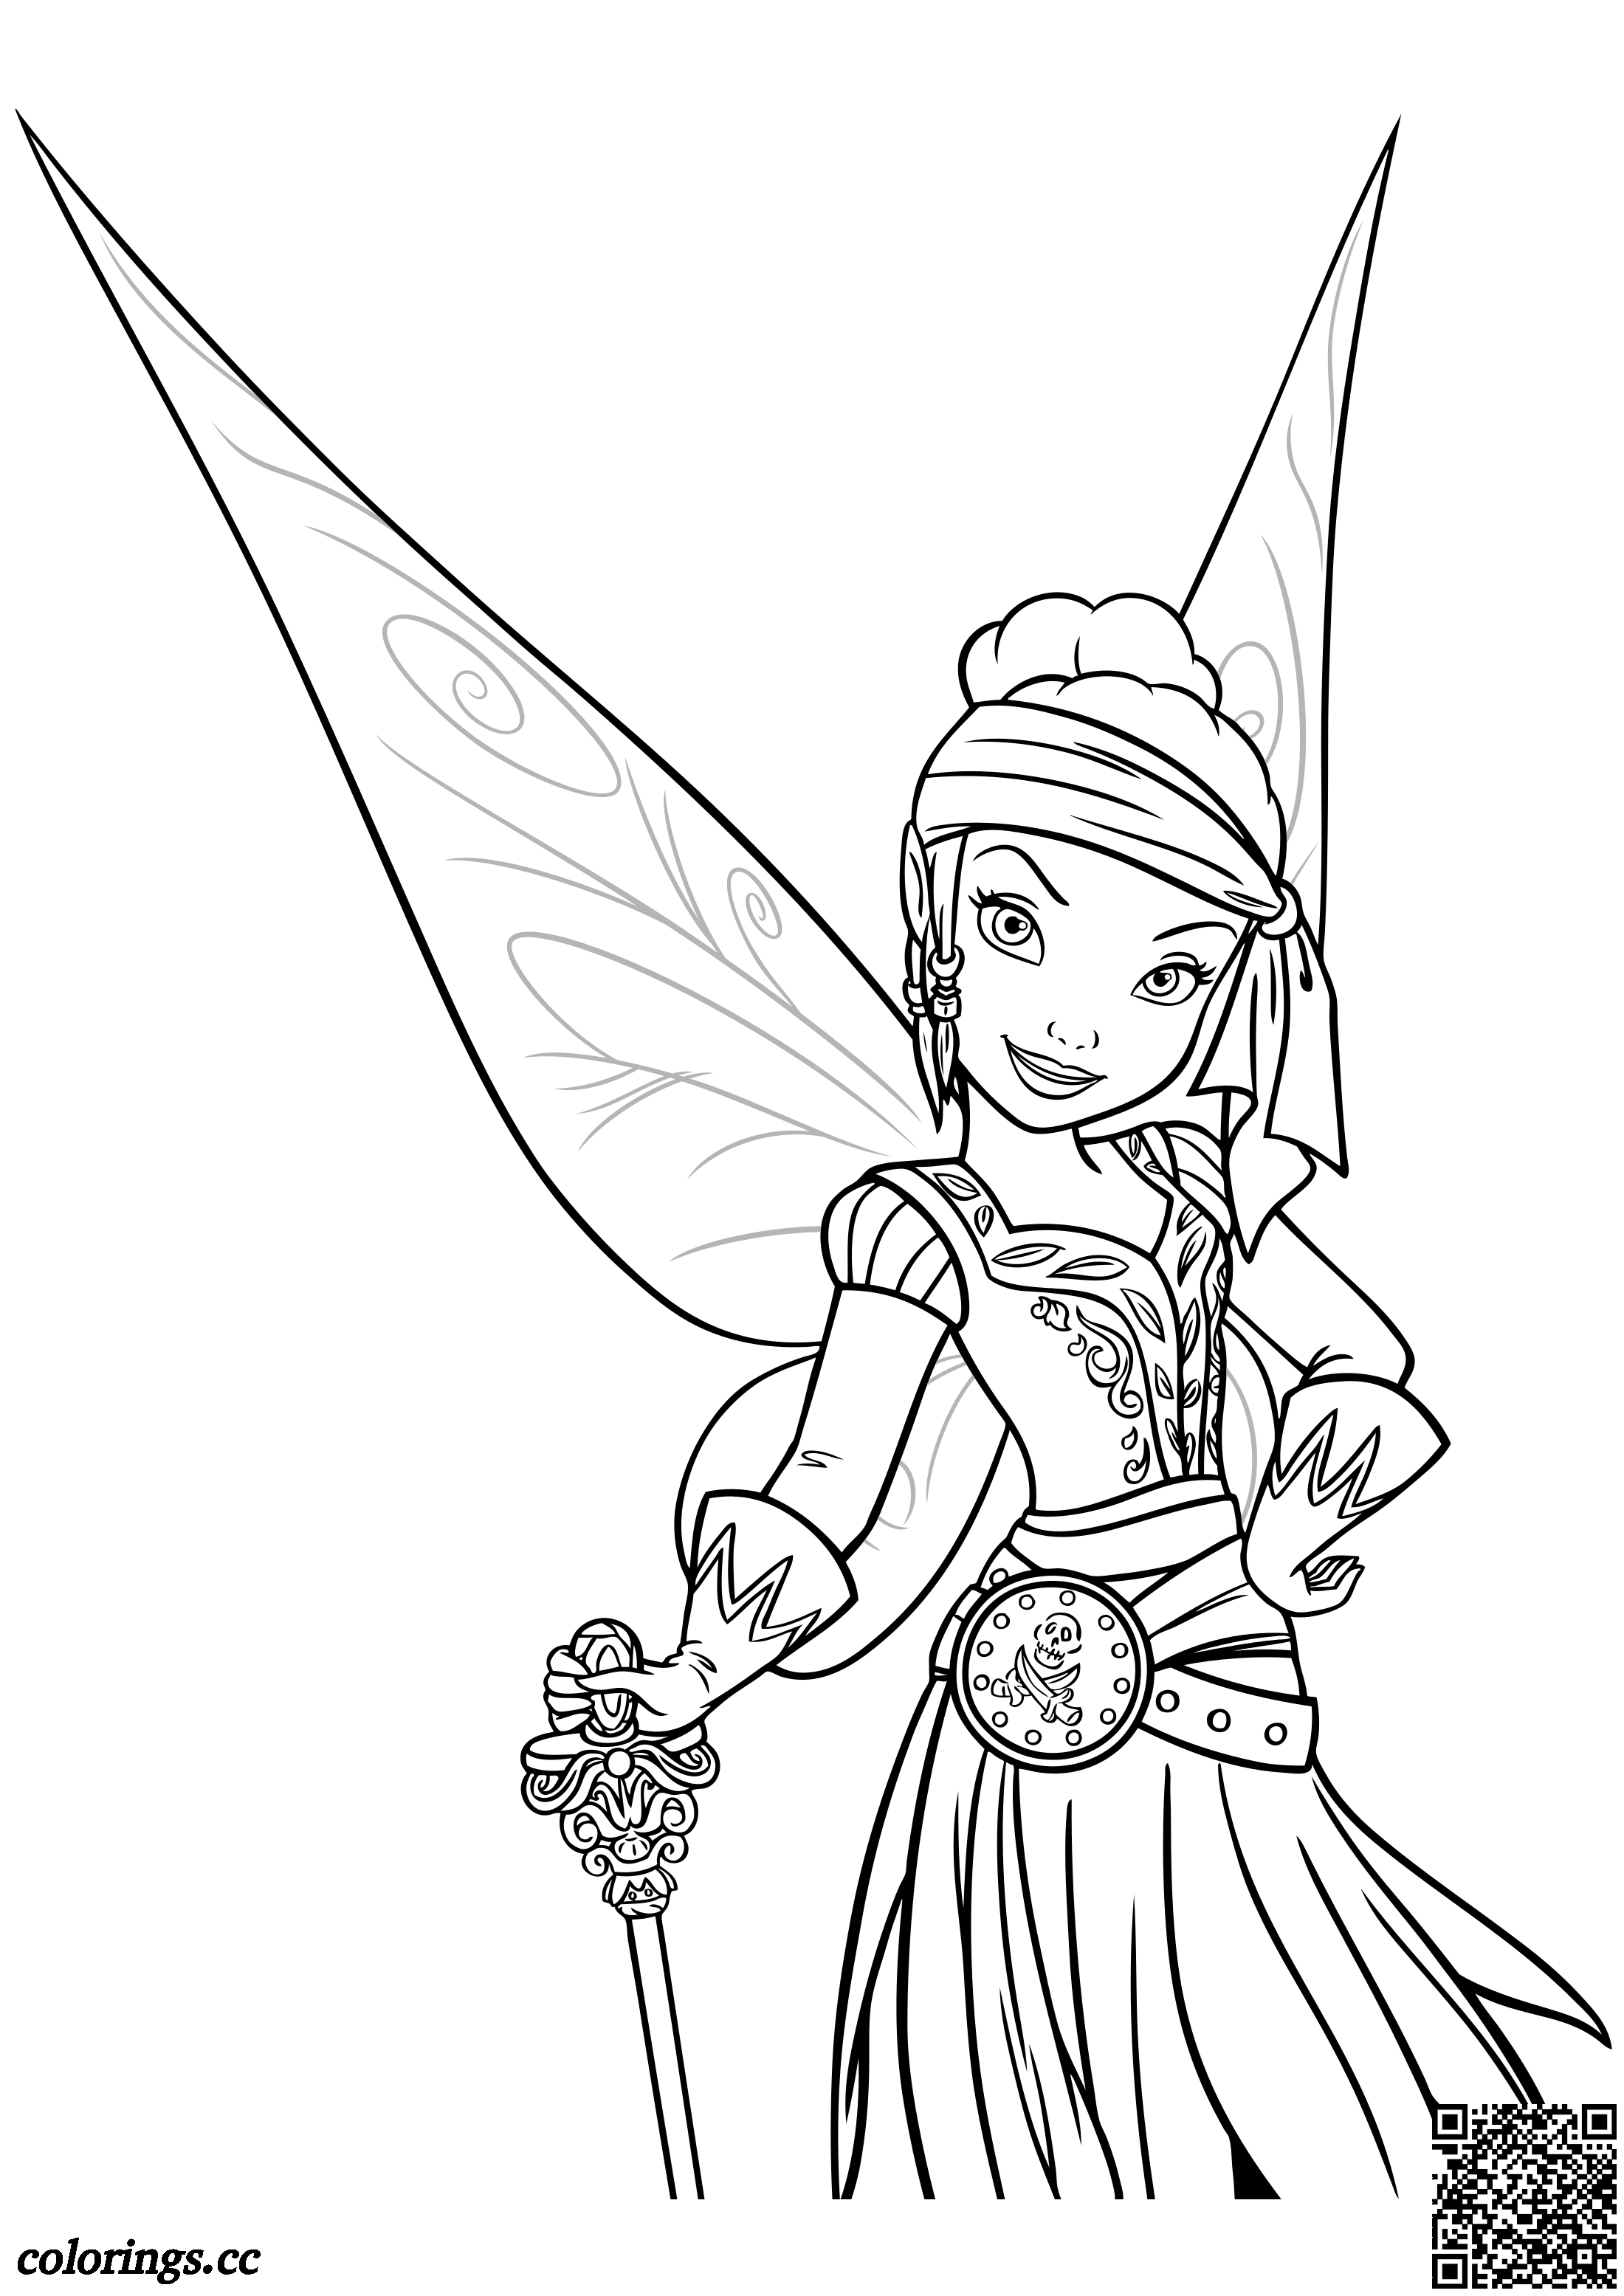 tinkerbell pirate fairy coloring pages